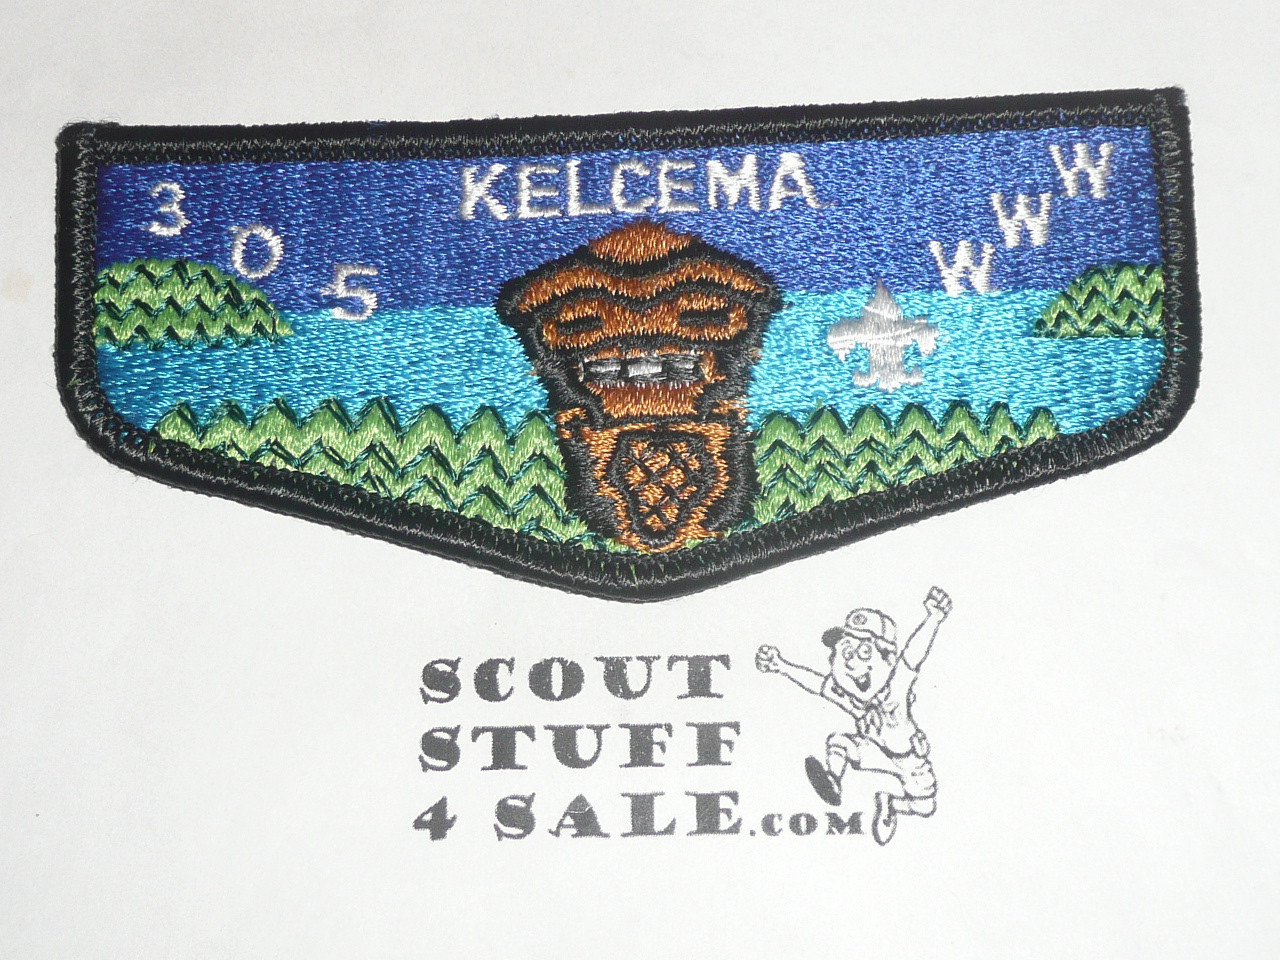 Order of the Arrow Lodge #305 Kelcema s6 Flap Patch